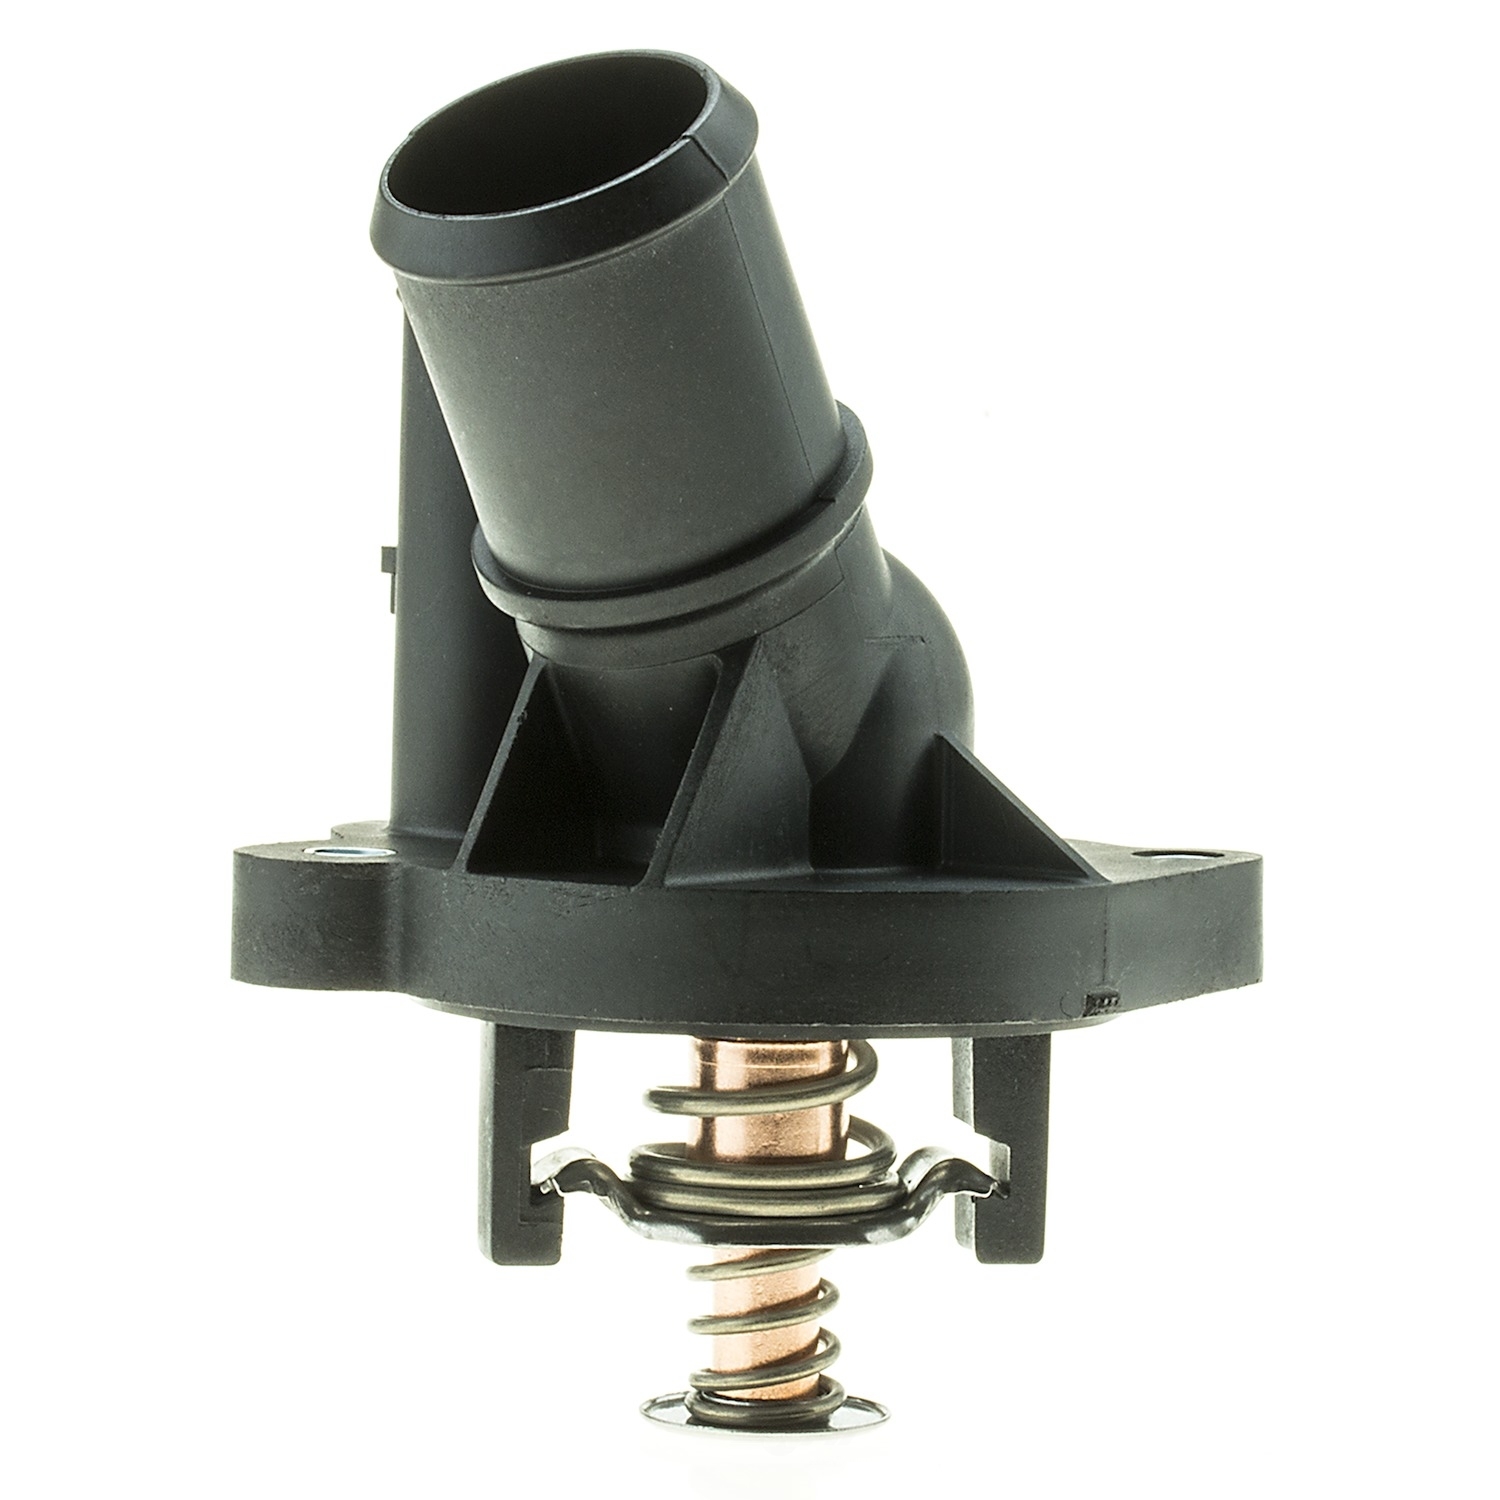 STANT - Integrated Thermostat Housing - STN 48689